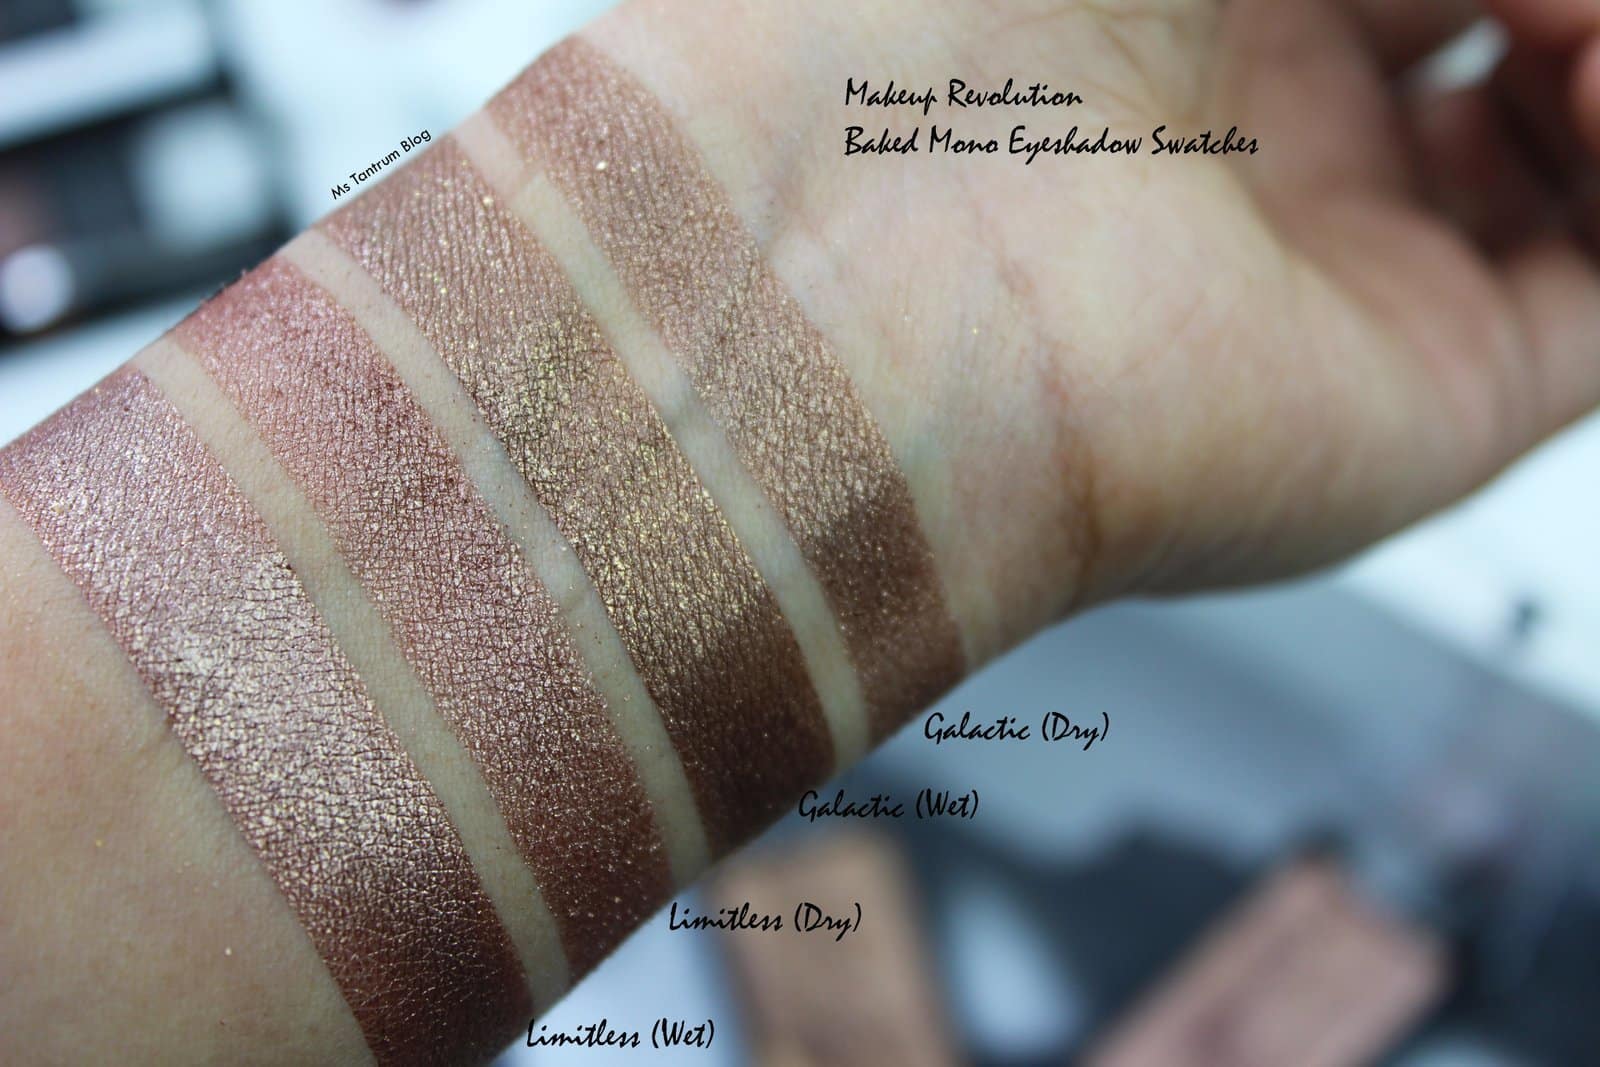 Makeup Revolution Baked Eyeshadow swatches - Limitless, Galactic